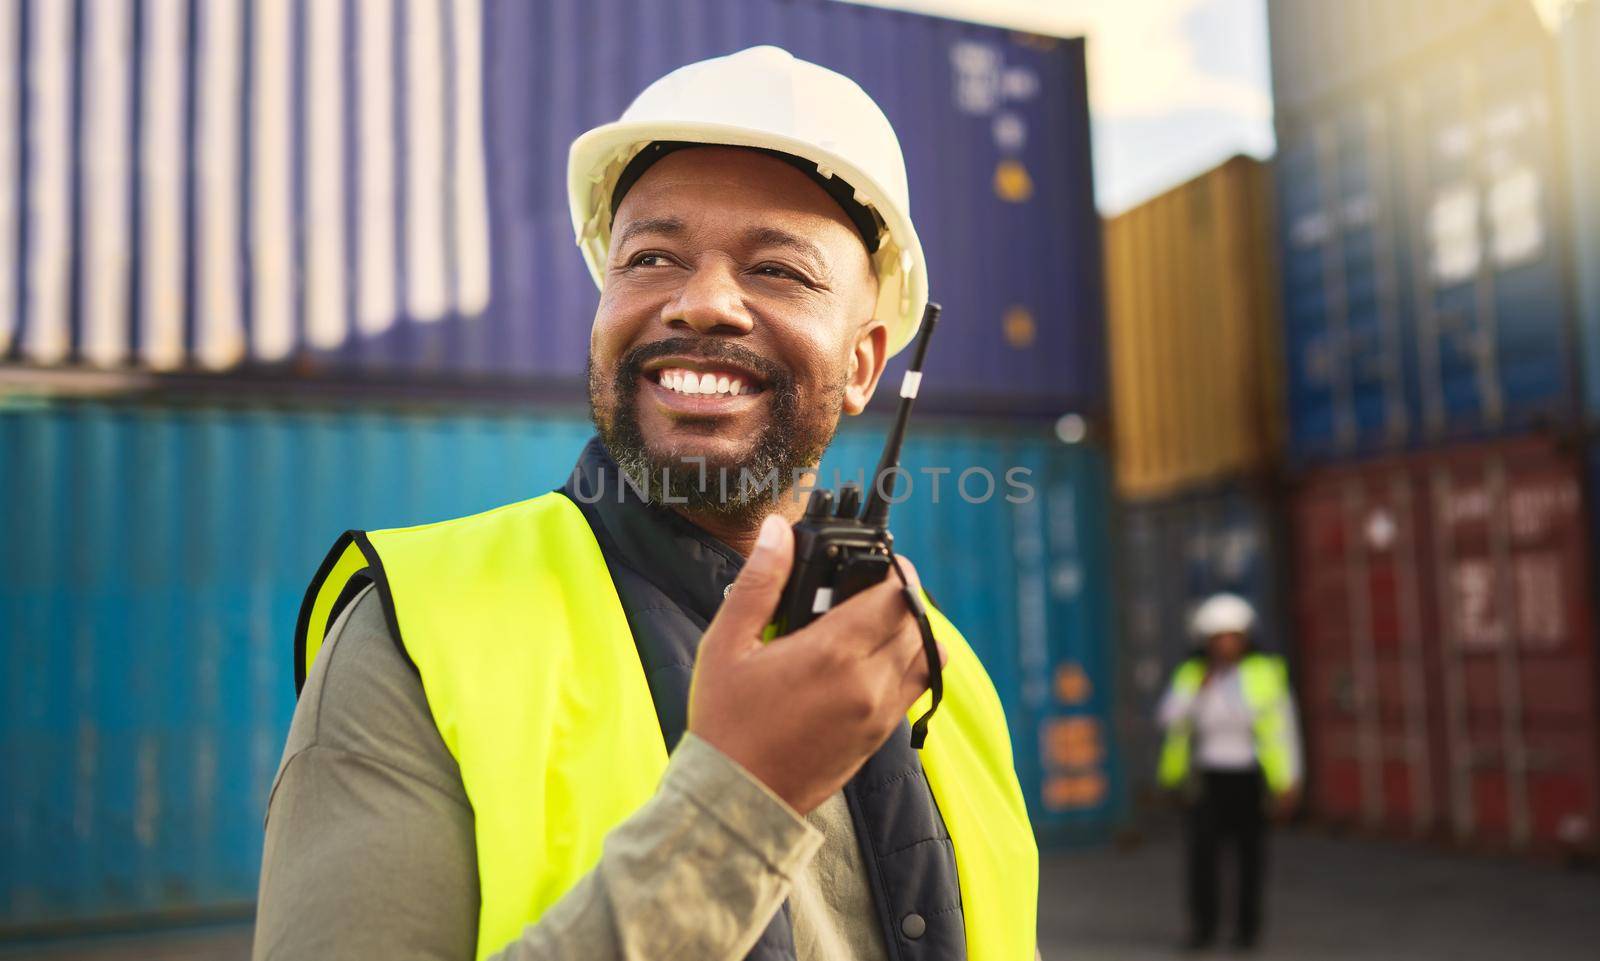 Man in logistics talking on radio, communication in shipping and transportation industry with a smile. Organization of commercial cargo, e-commerce containers and supply chain management of shipyard.